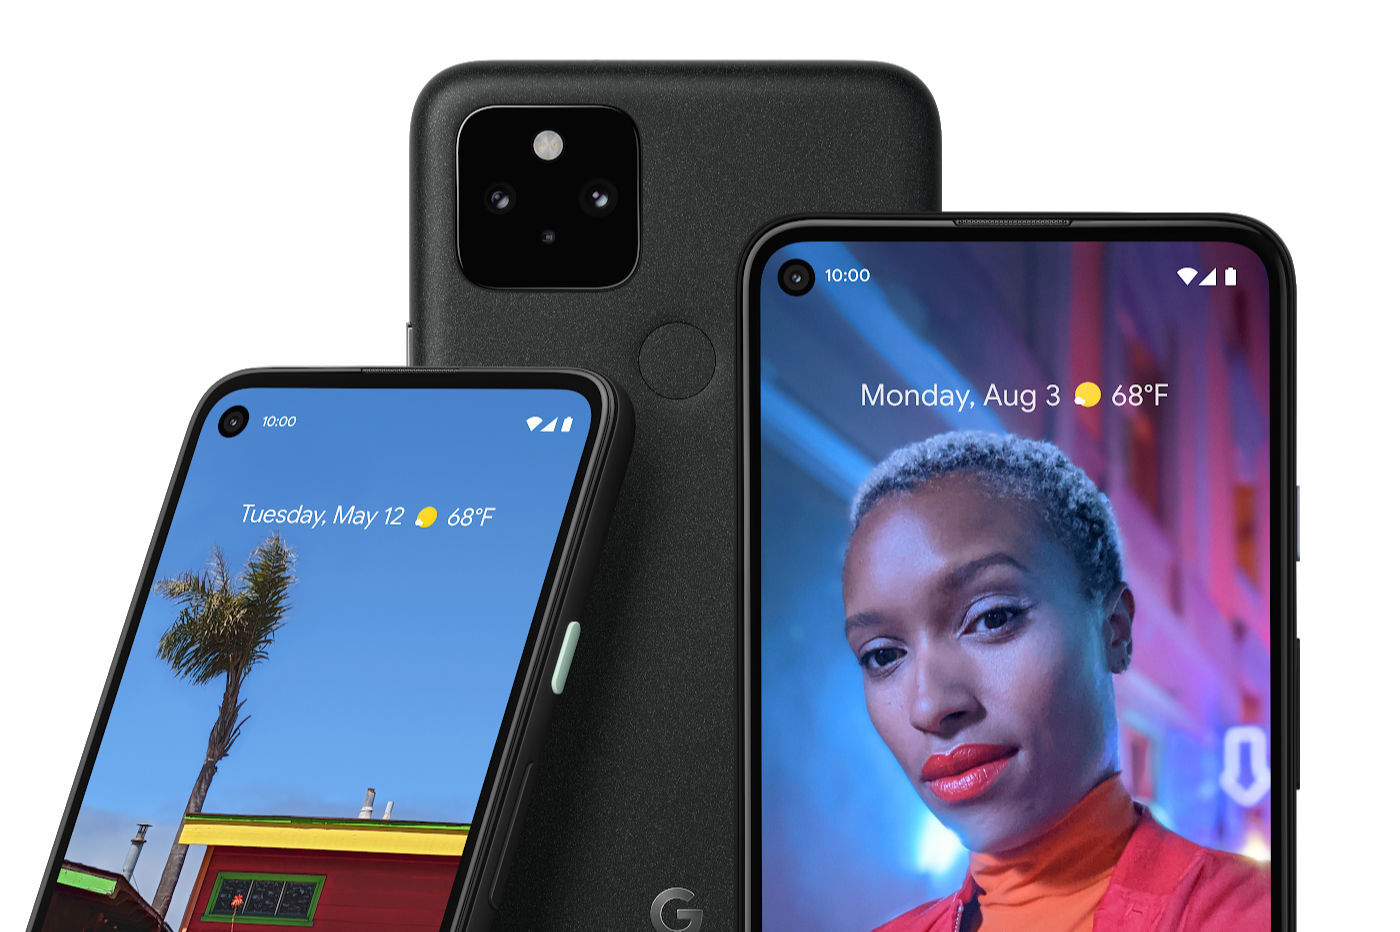 Pixel 4a 5G and Pixel 5 everything: Google is scrapping two of last year's smartphone models